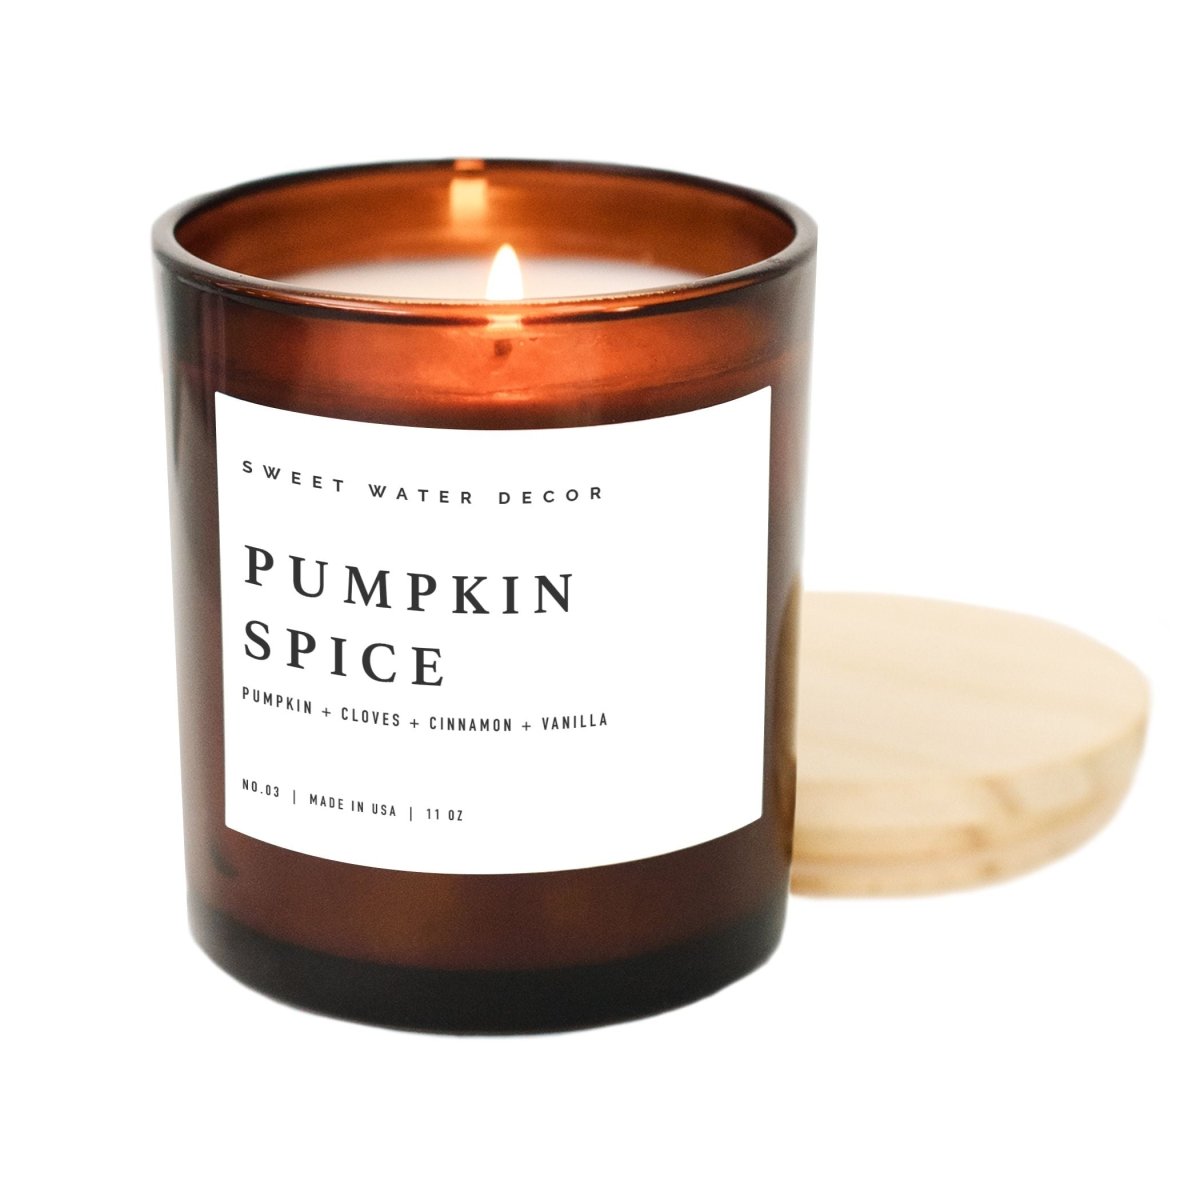 Sweet Water Decor Pumpkin Spice Soy Candle - Amber Jar - 11 oz - lily & onyx